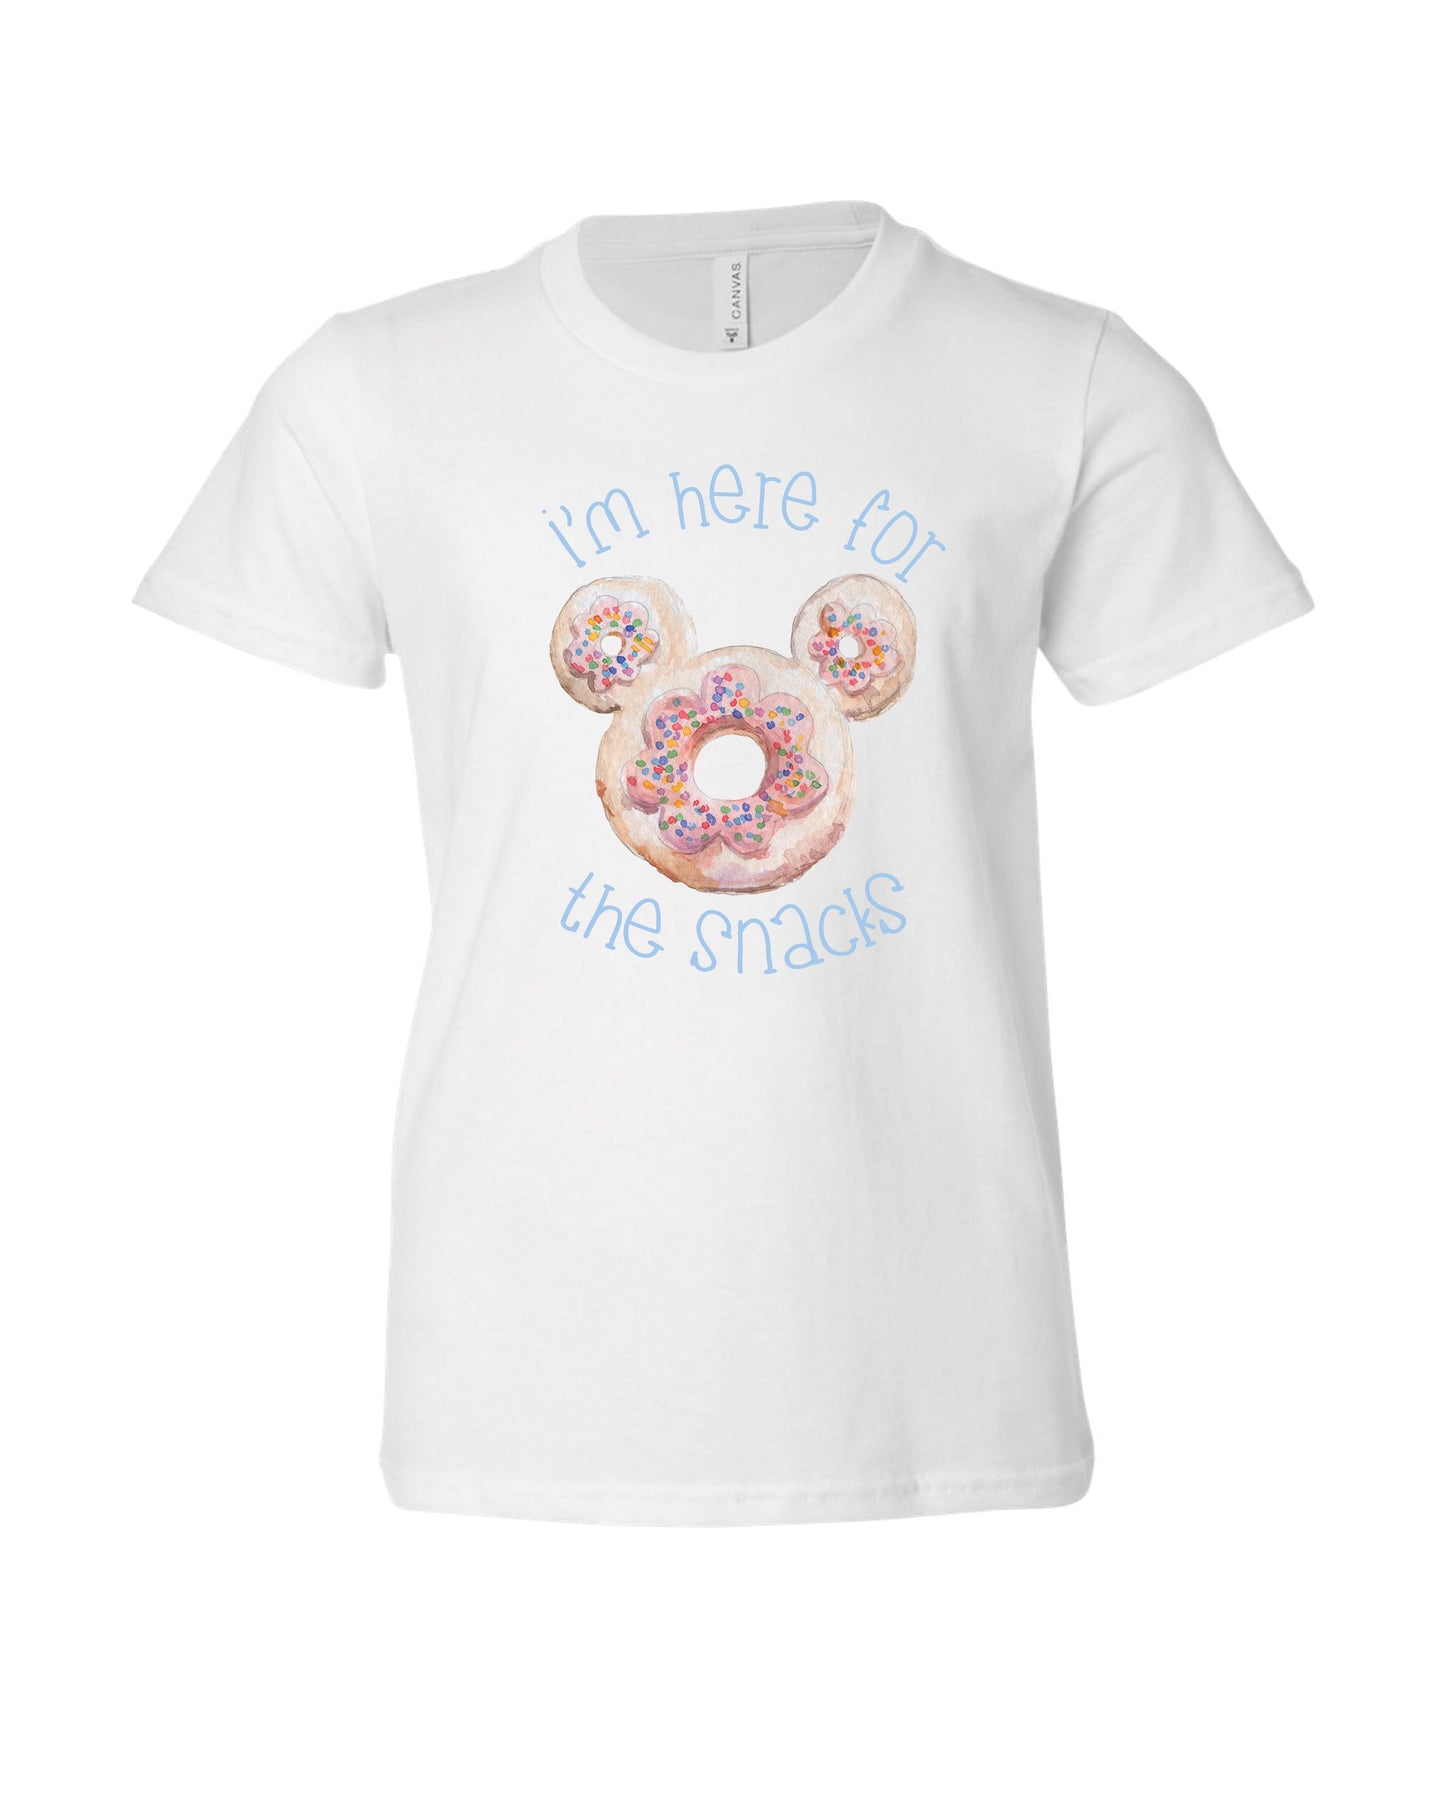 Here For The Snacks | Tee | Adult-Sister Shirts-Sister Shirts, Cute & Custom Tees for Mama & Littles in Trussville, Alabama.